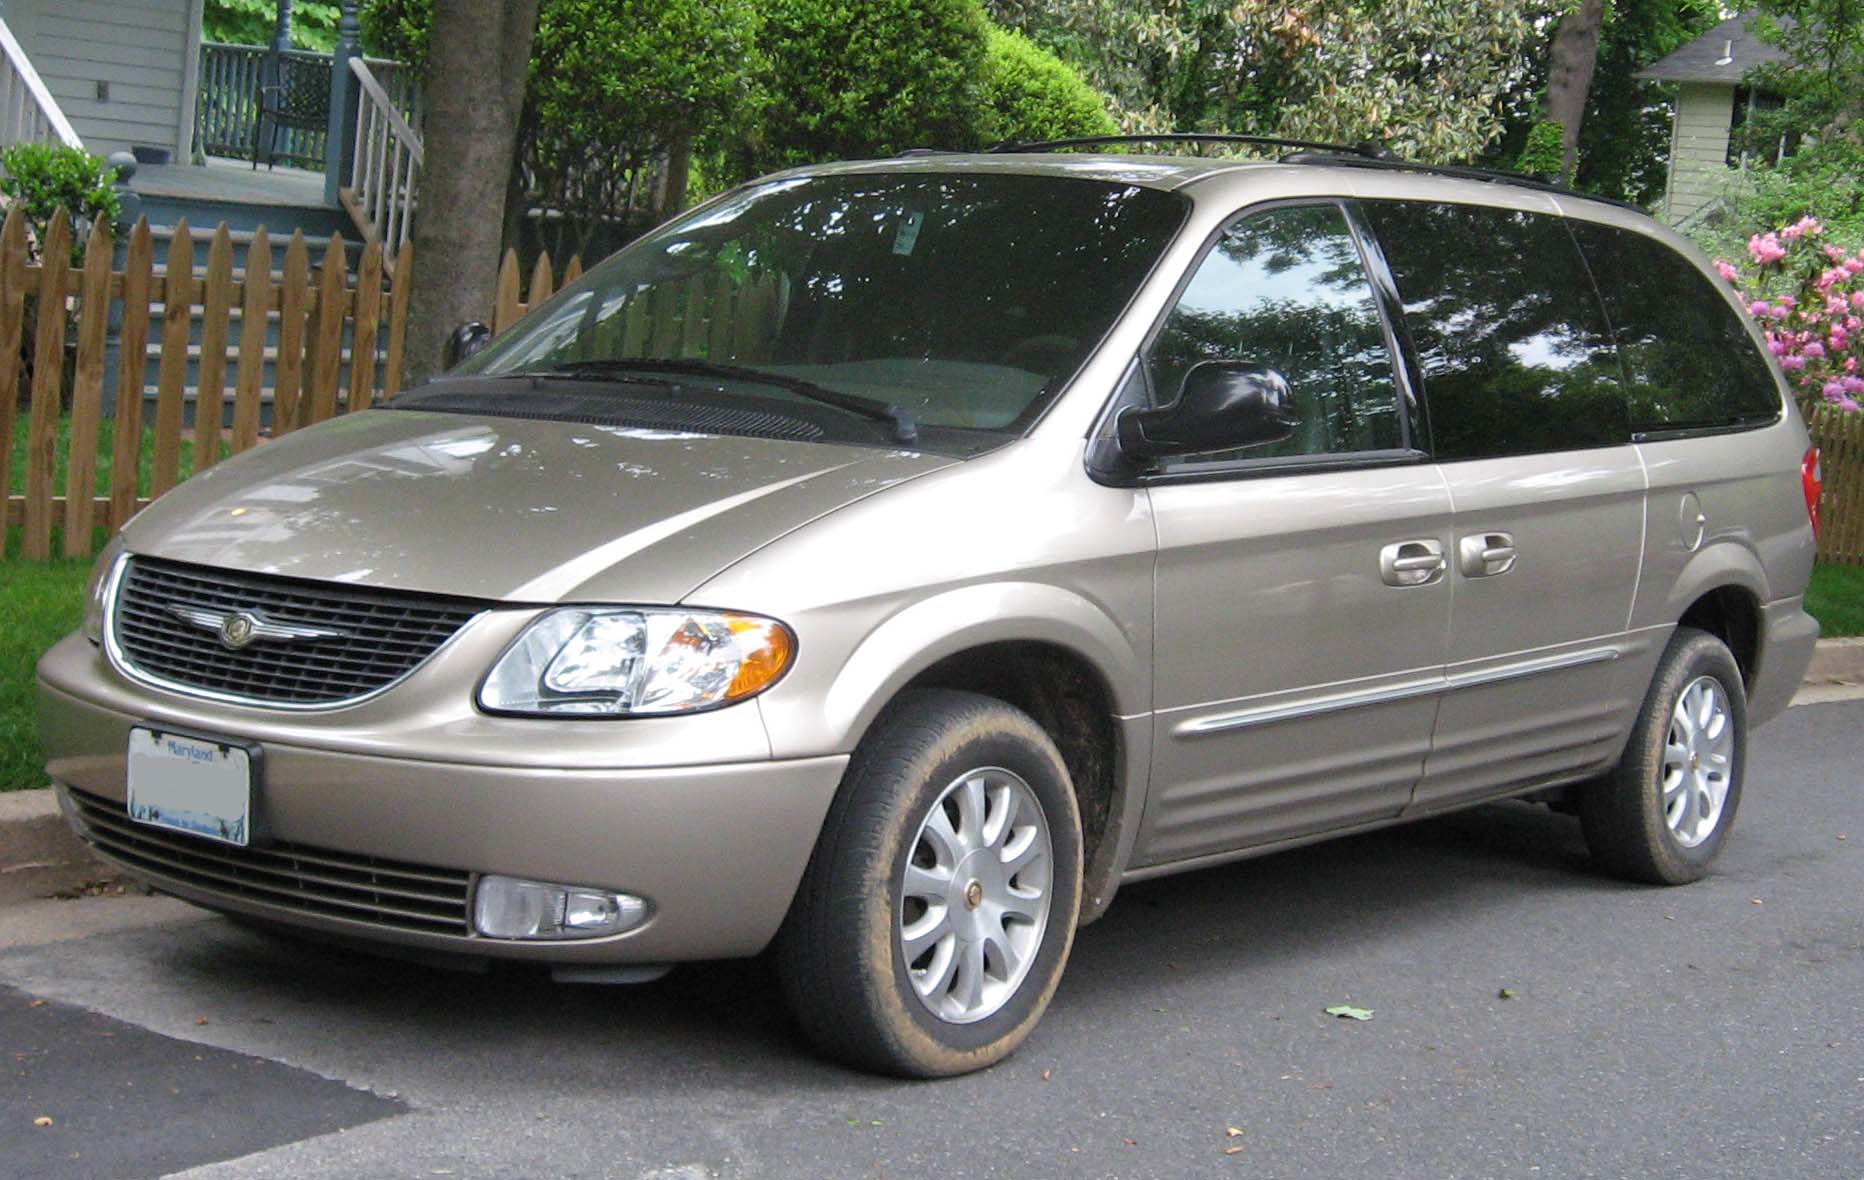 2001 Chrysler Town and Country Information and photos